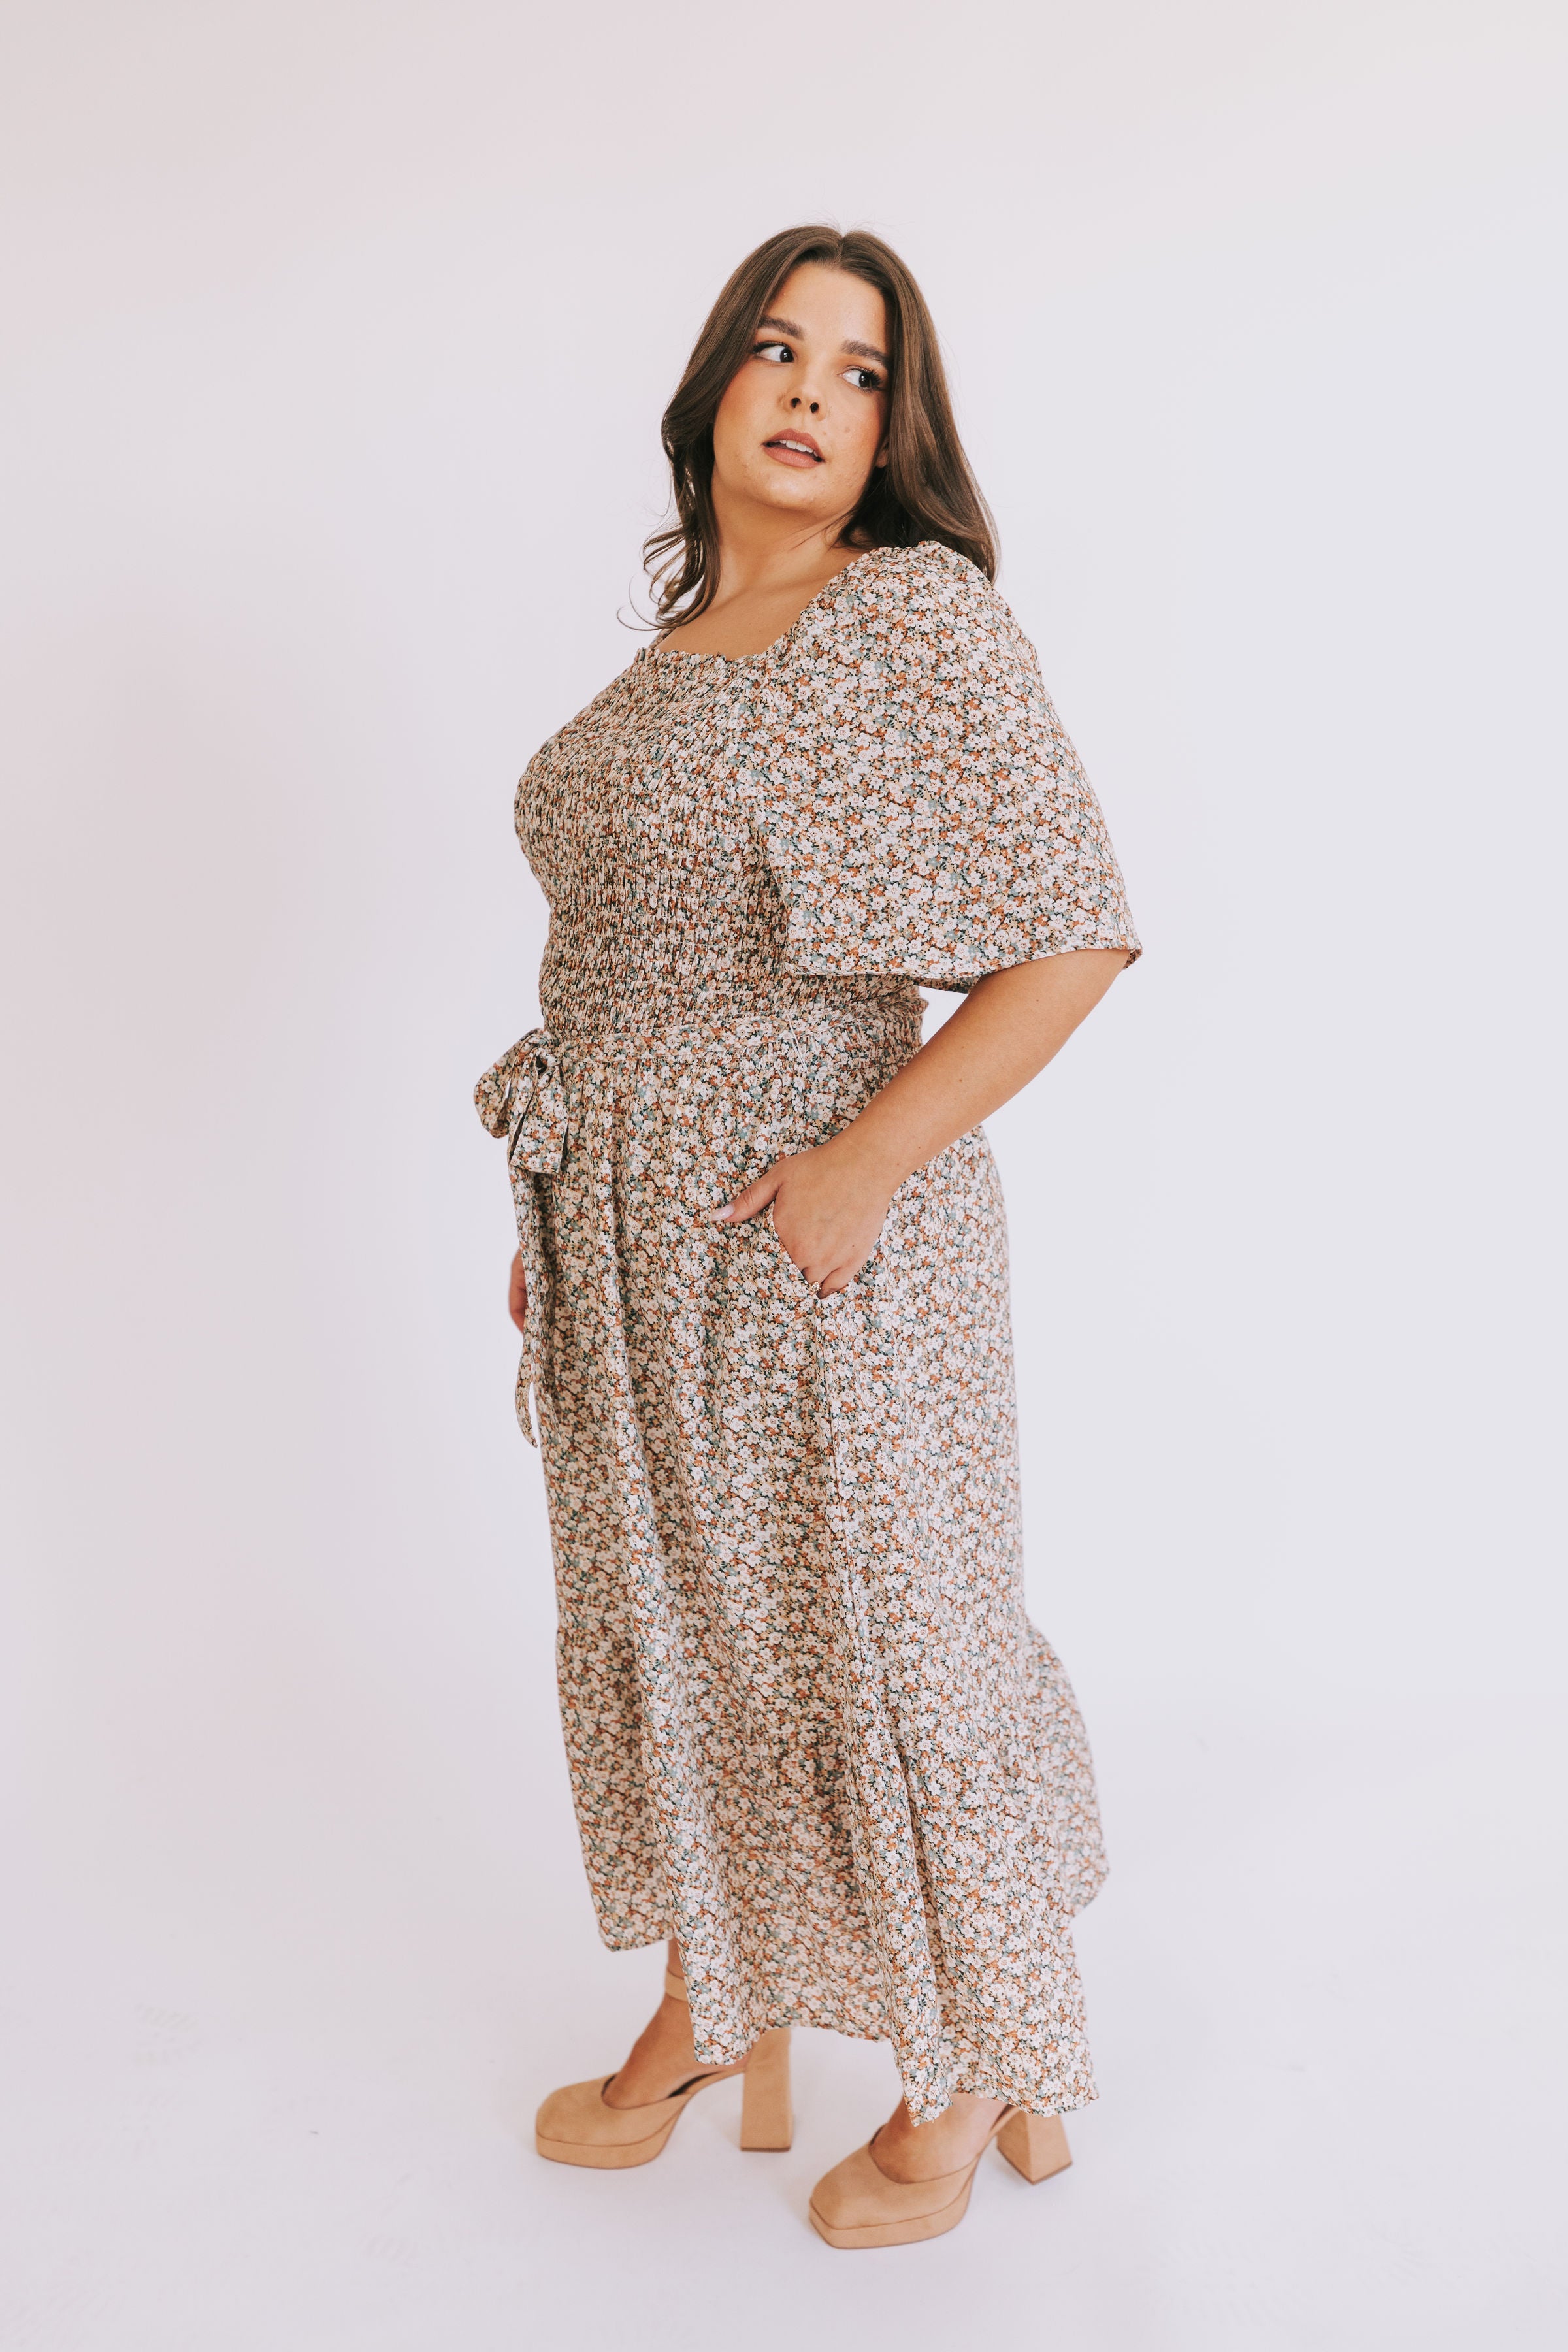 PLUS SIZE - Be Yourself Dress